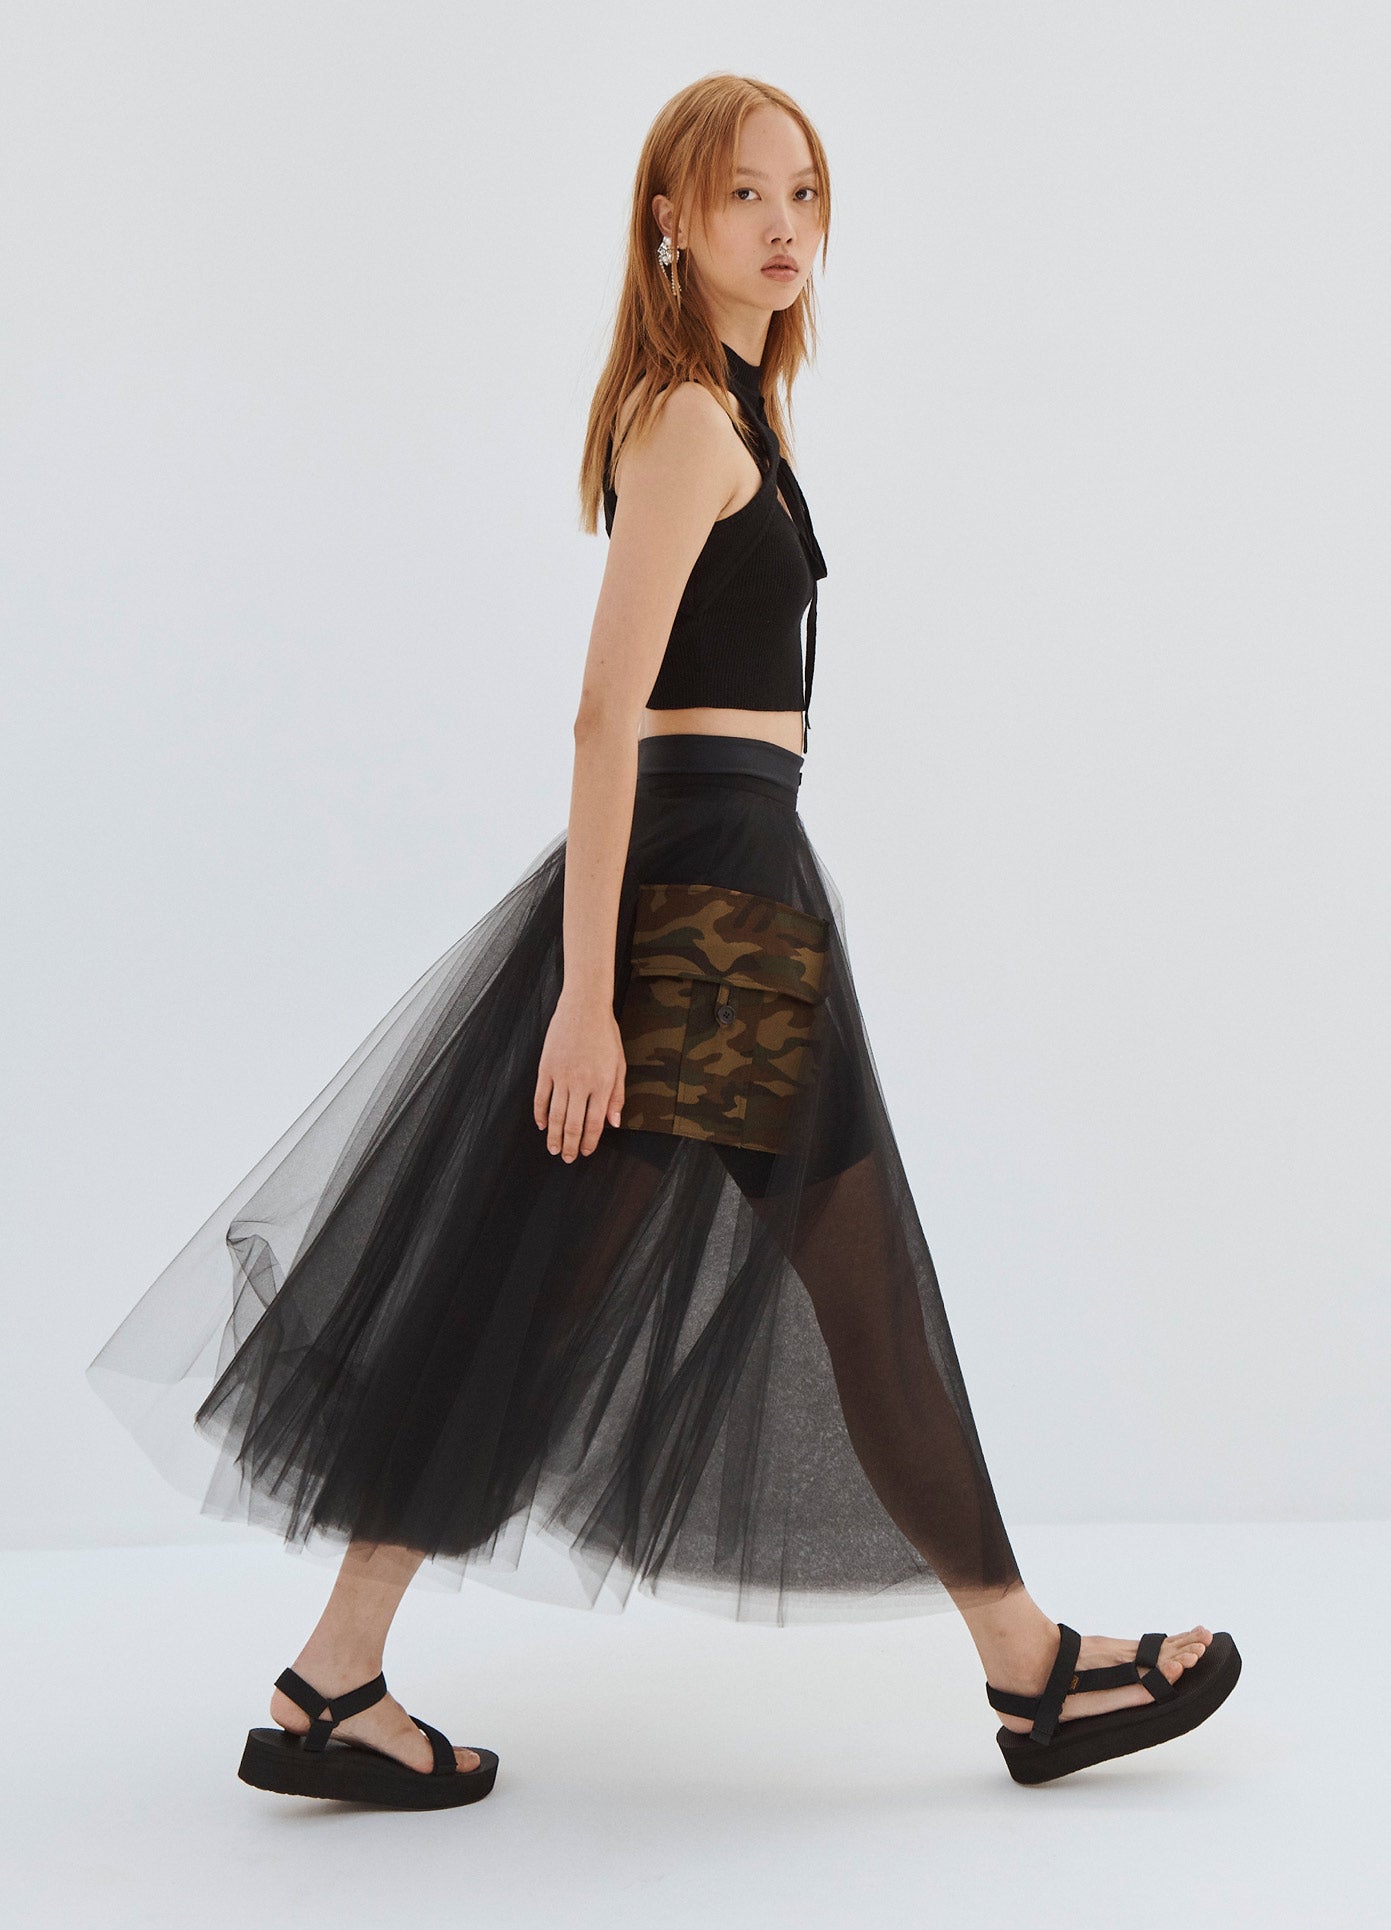 MONSE Tulle Circle Skirt with Cargo Pockets in Black and Camo on Model Walking Side View